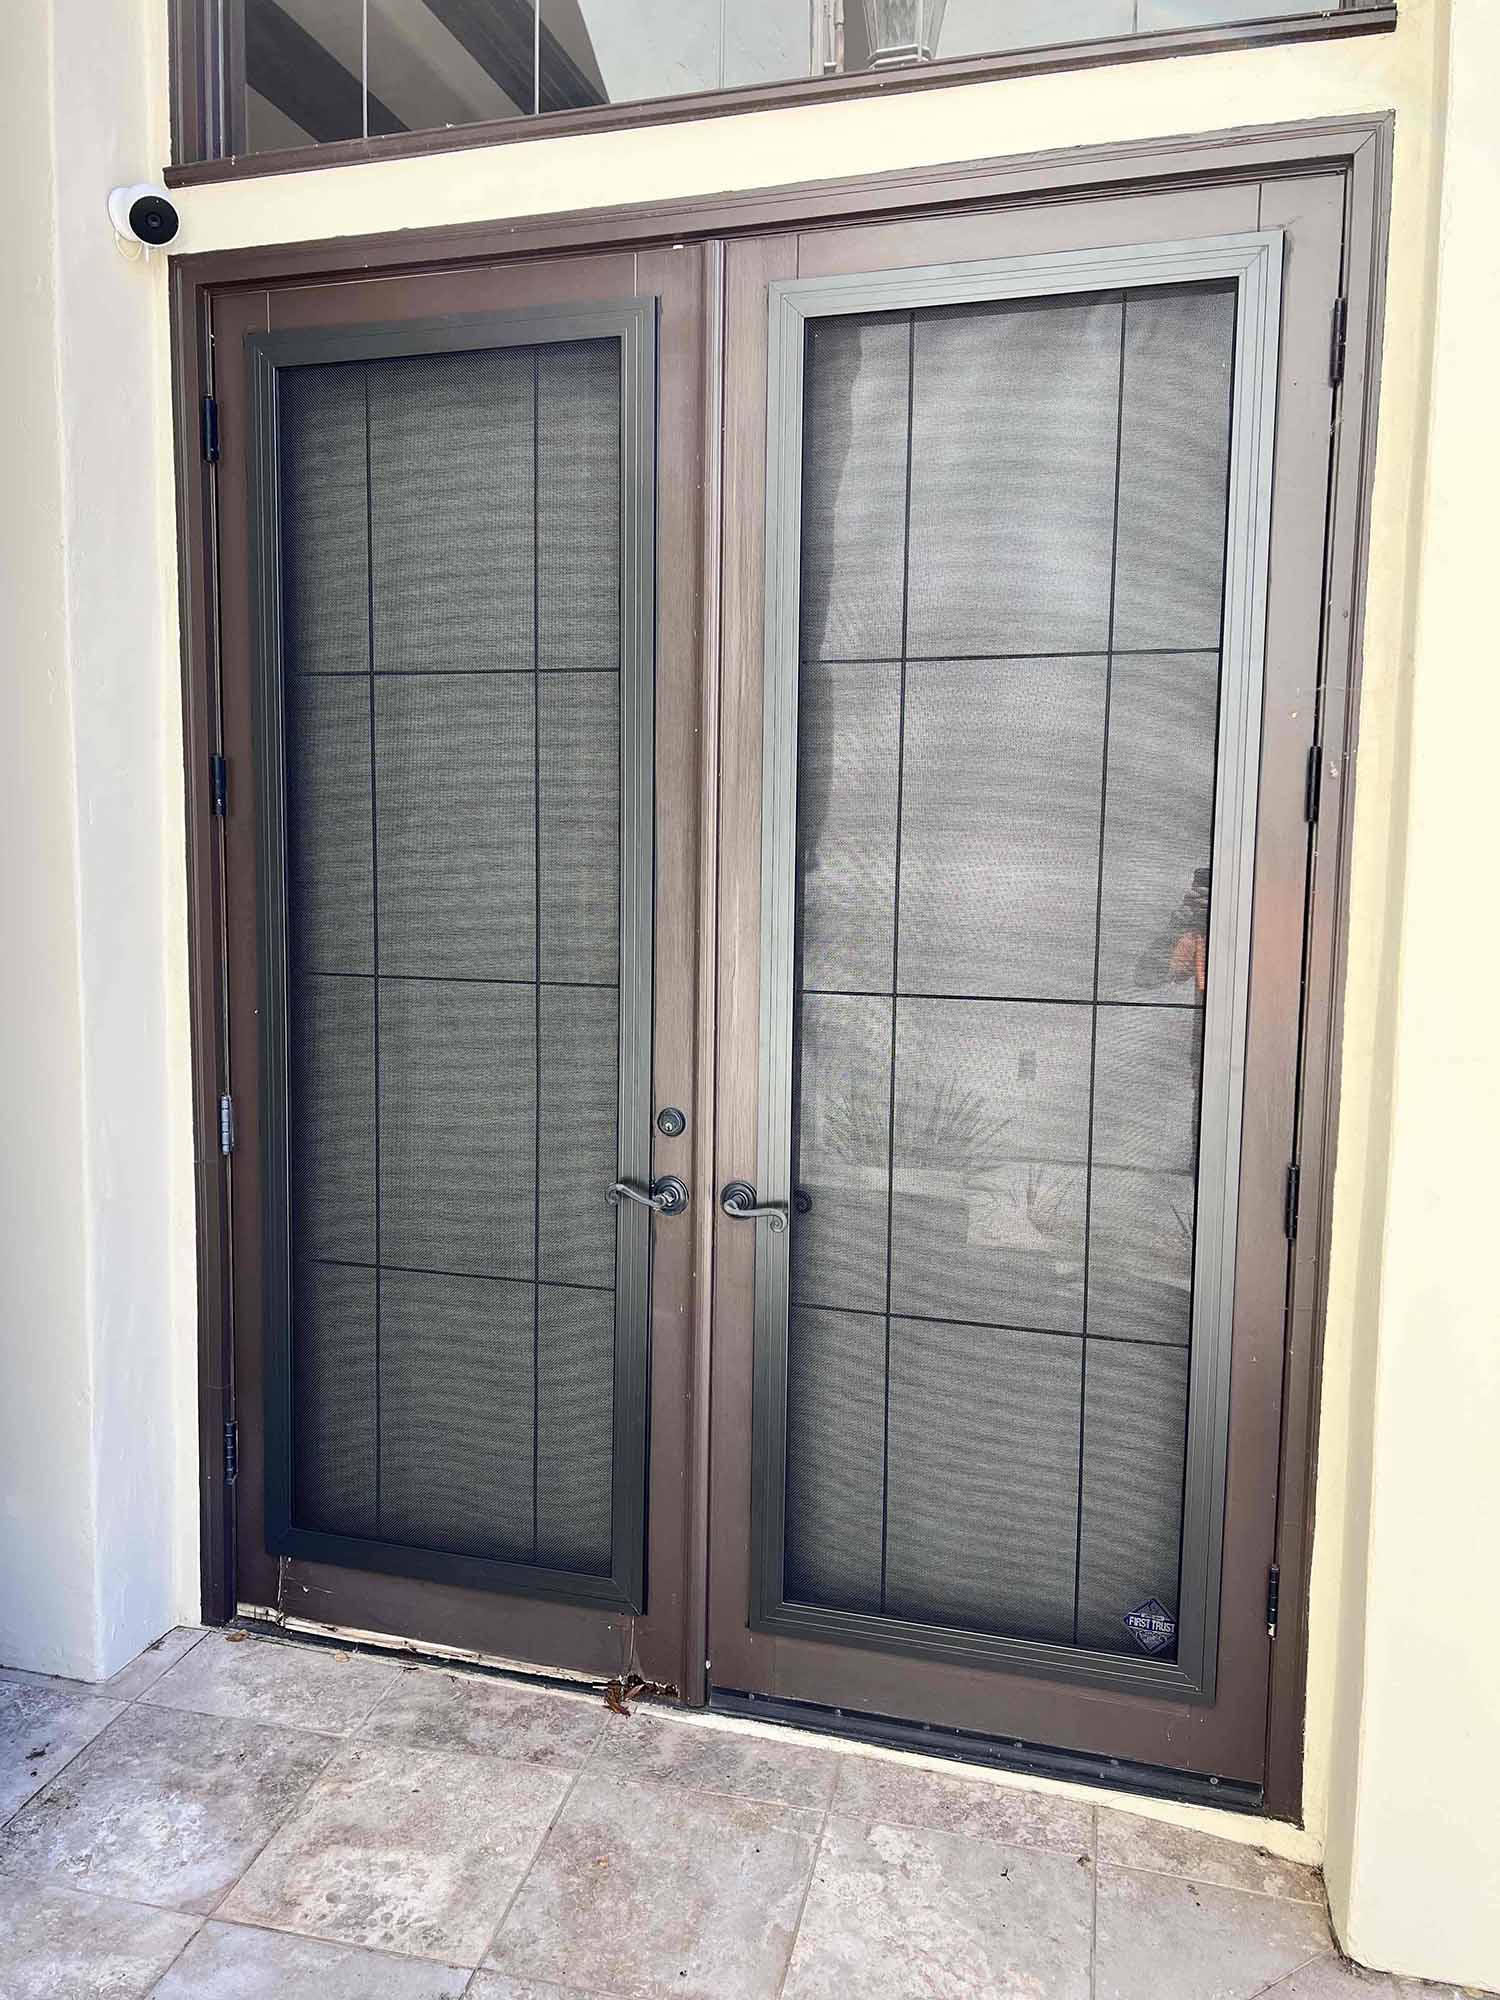 A San Jose Home Gets Crimsafe Security Screens. Installed by ClimatePro.